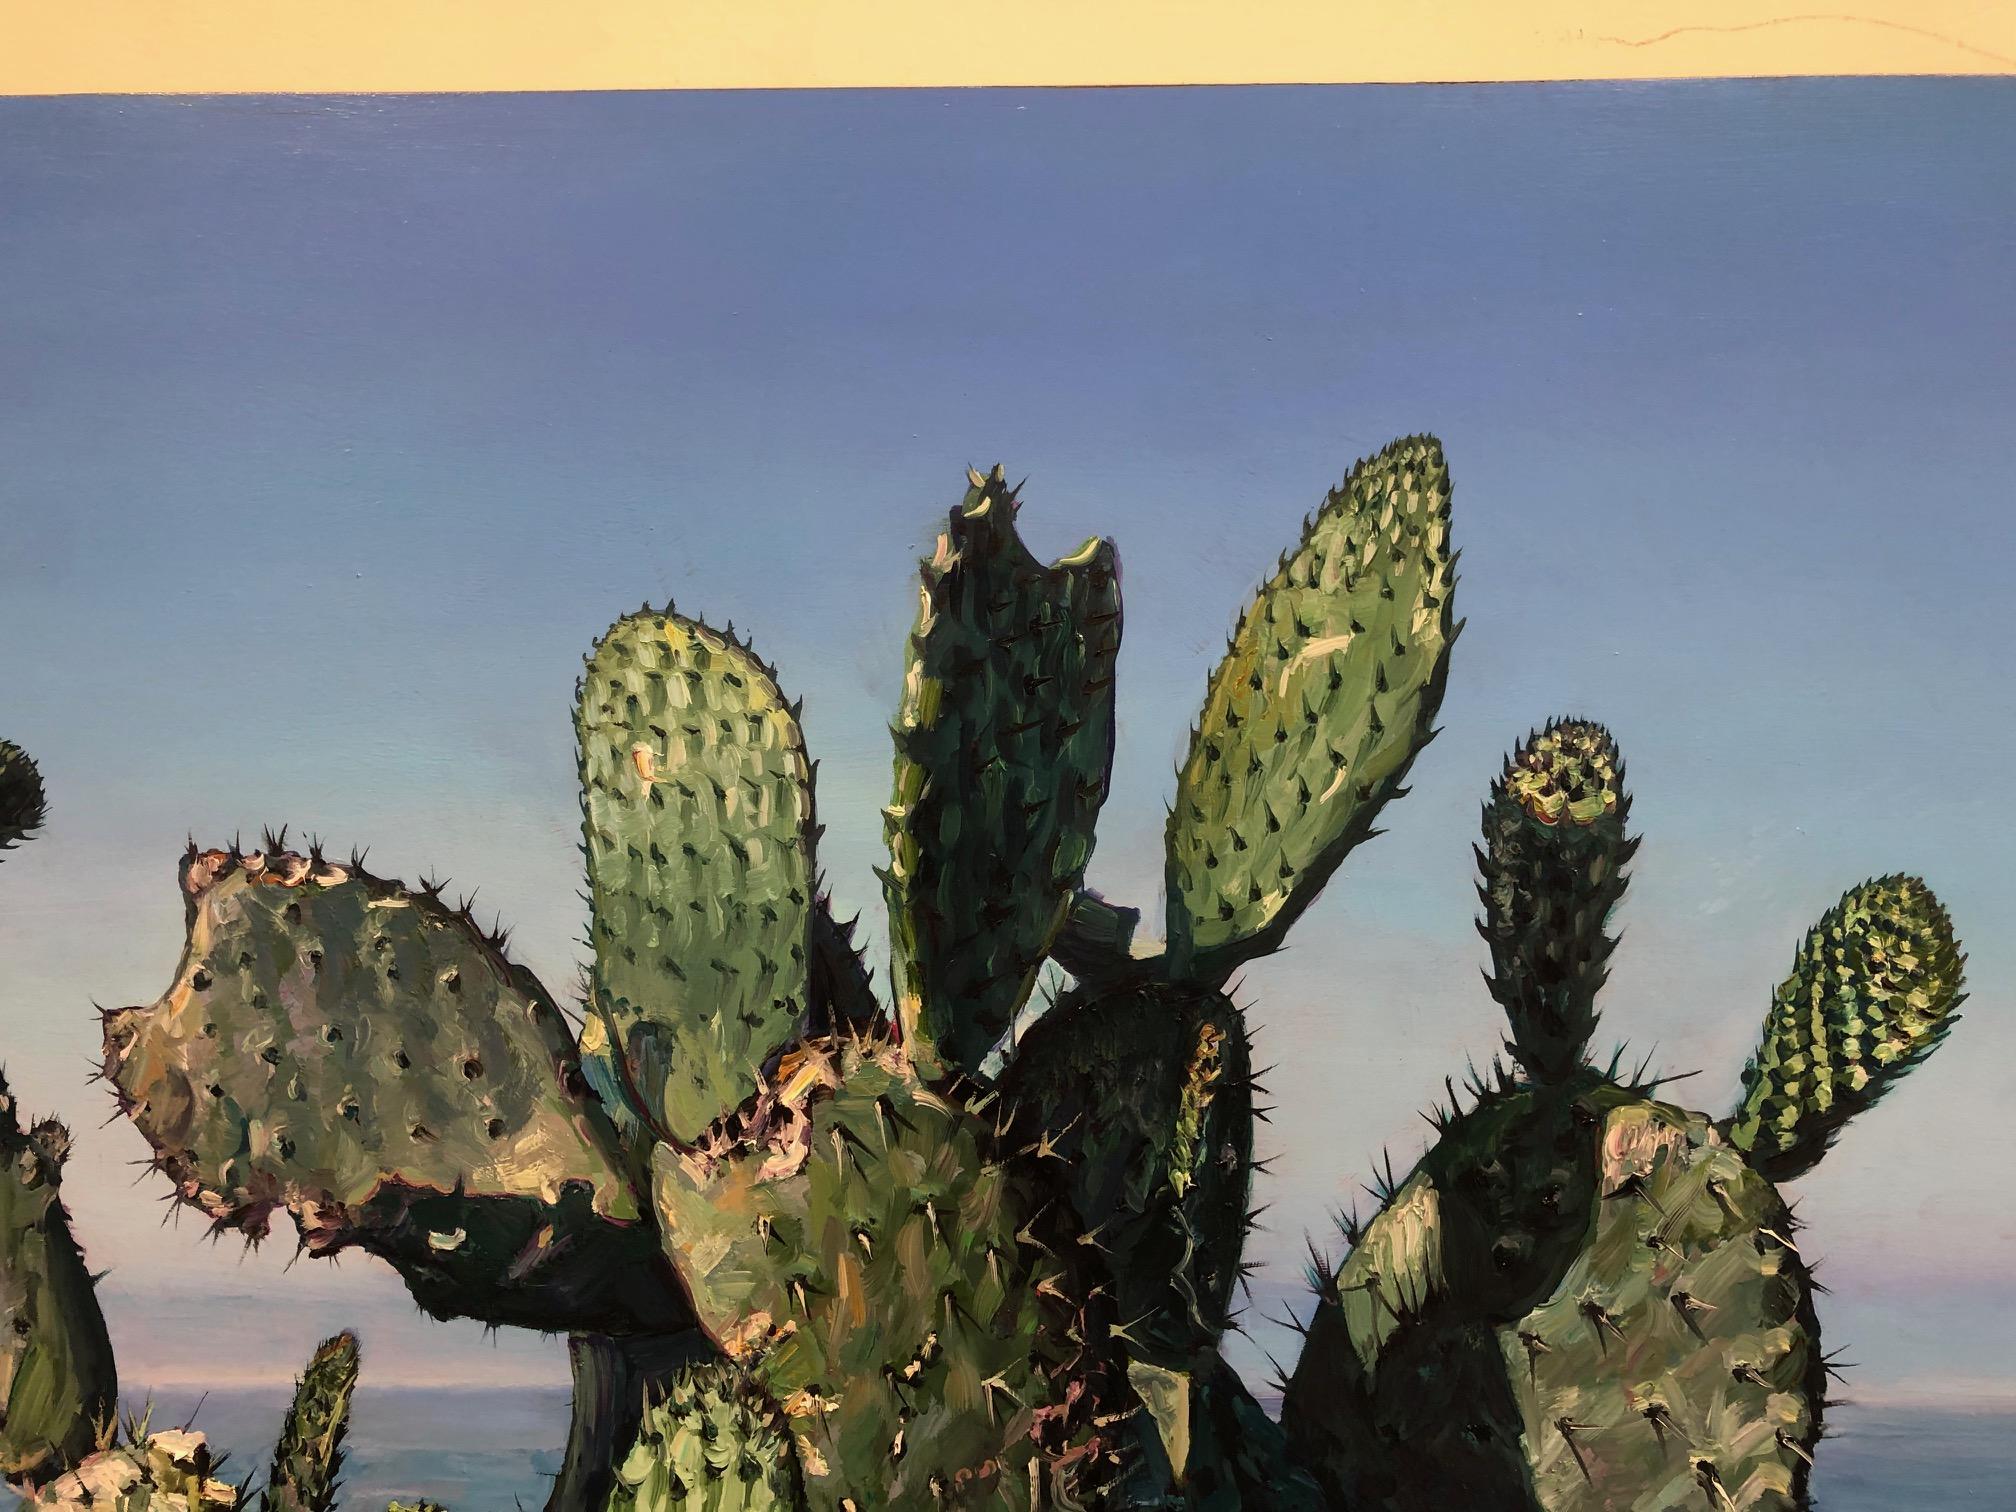 Desert cactus and the sea pictured in 'Emergence: Shadows and Light' where the artist uses cactus as a vehicle for exploring and recognizing the nuances of shadows (dark or hidden places), as well as the luminous, surface places—and all the varying